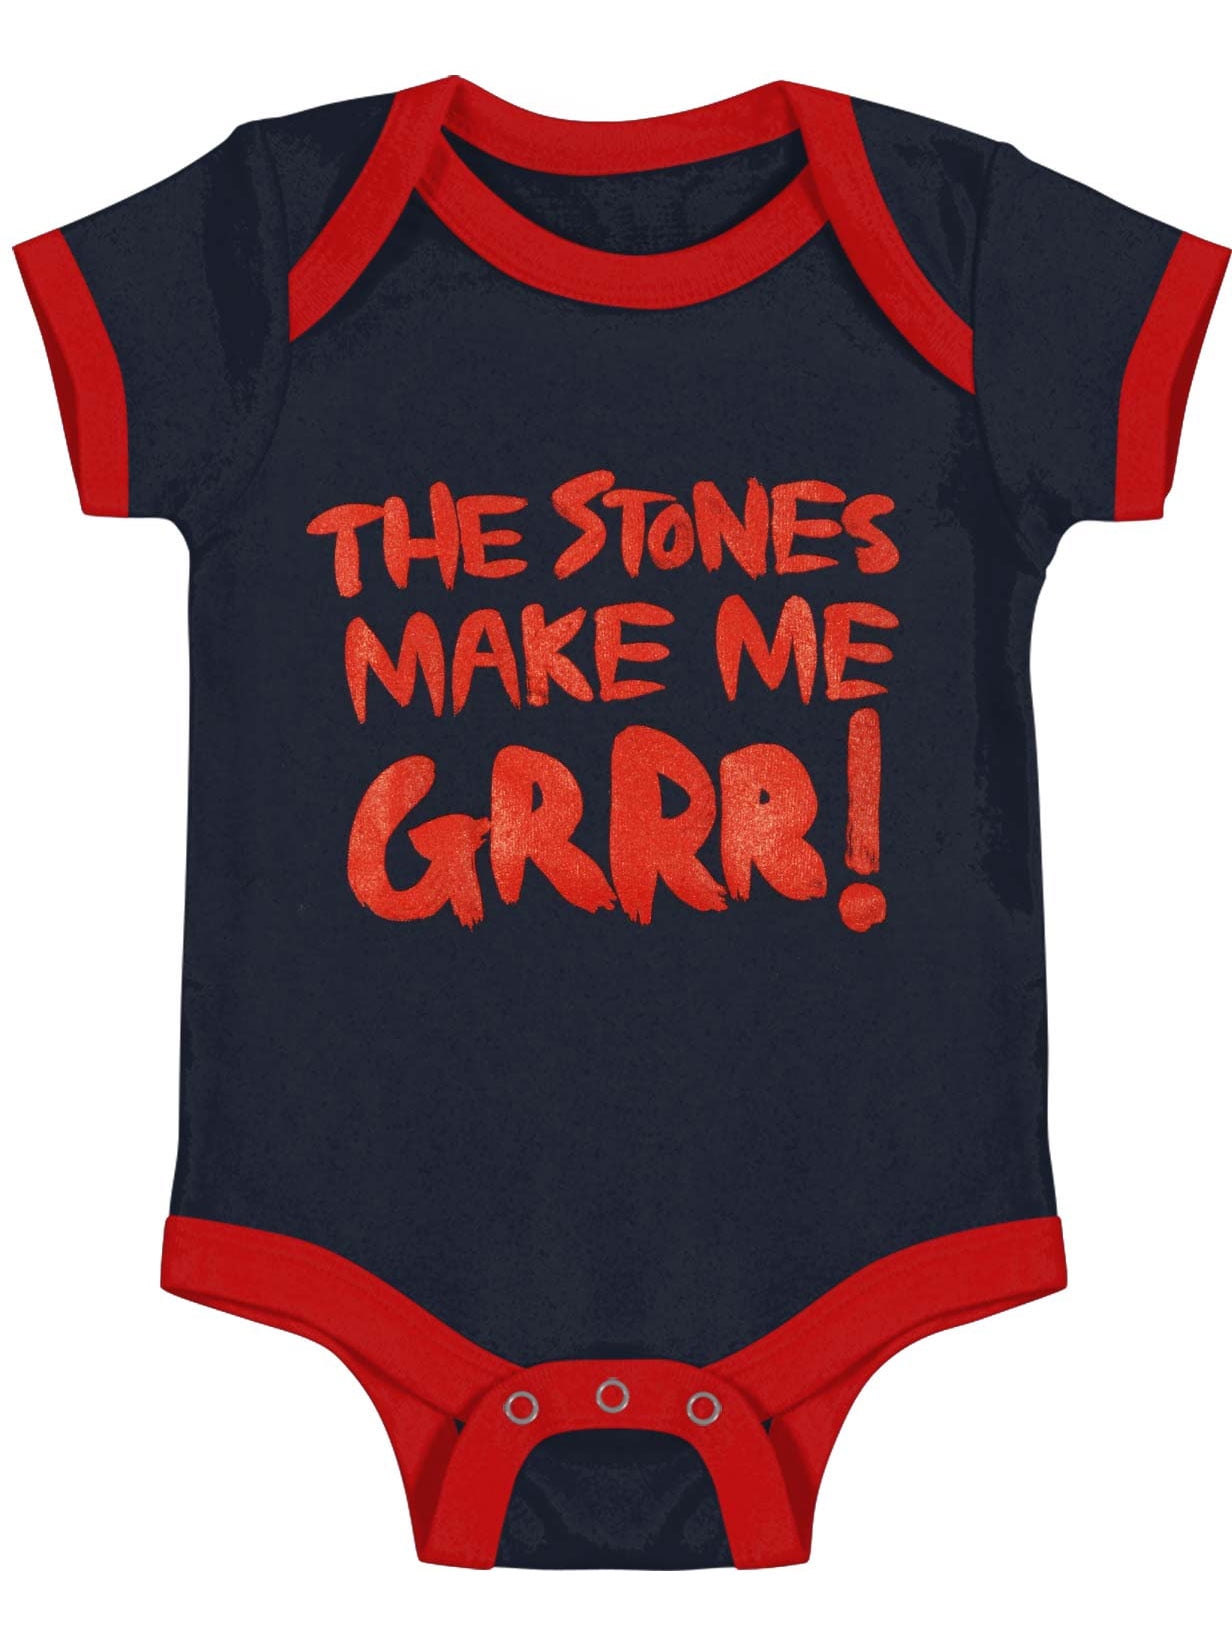 Th Rolling Stones Baby Crawler Baby Personality Climbing Clothes Infant Rompers 